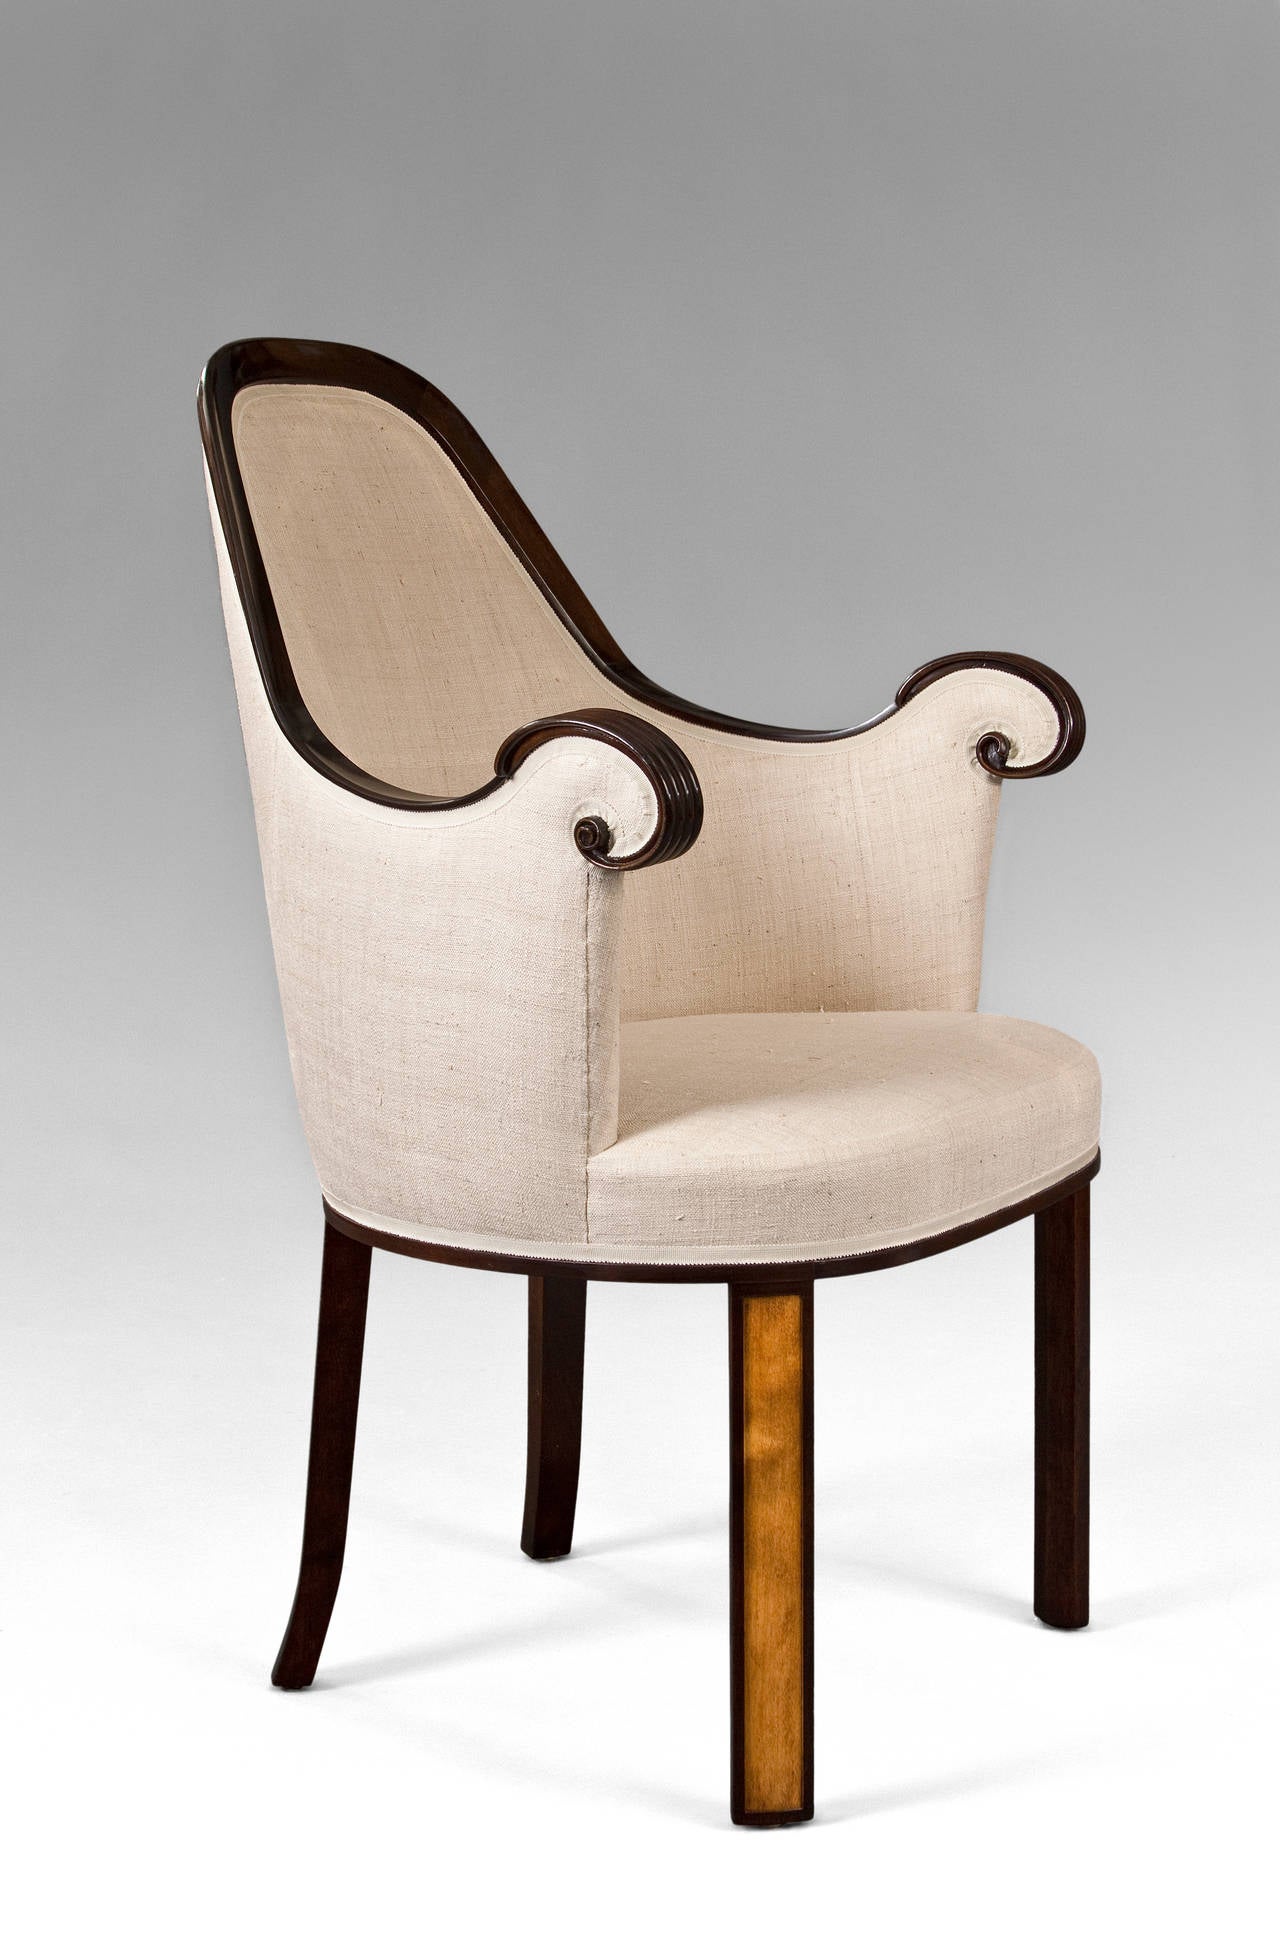 Crowned with a sinuous wooden arch rising above an upholstered back, terminating in reeded scrolled armrests, the rounded seat rests on paneled rectangular legs, with two brass manufacturer plaques: 